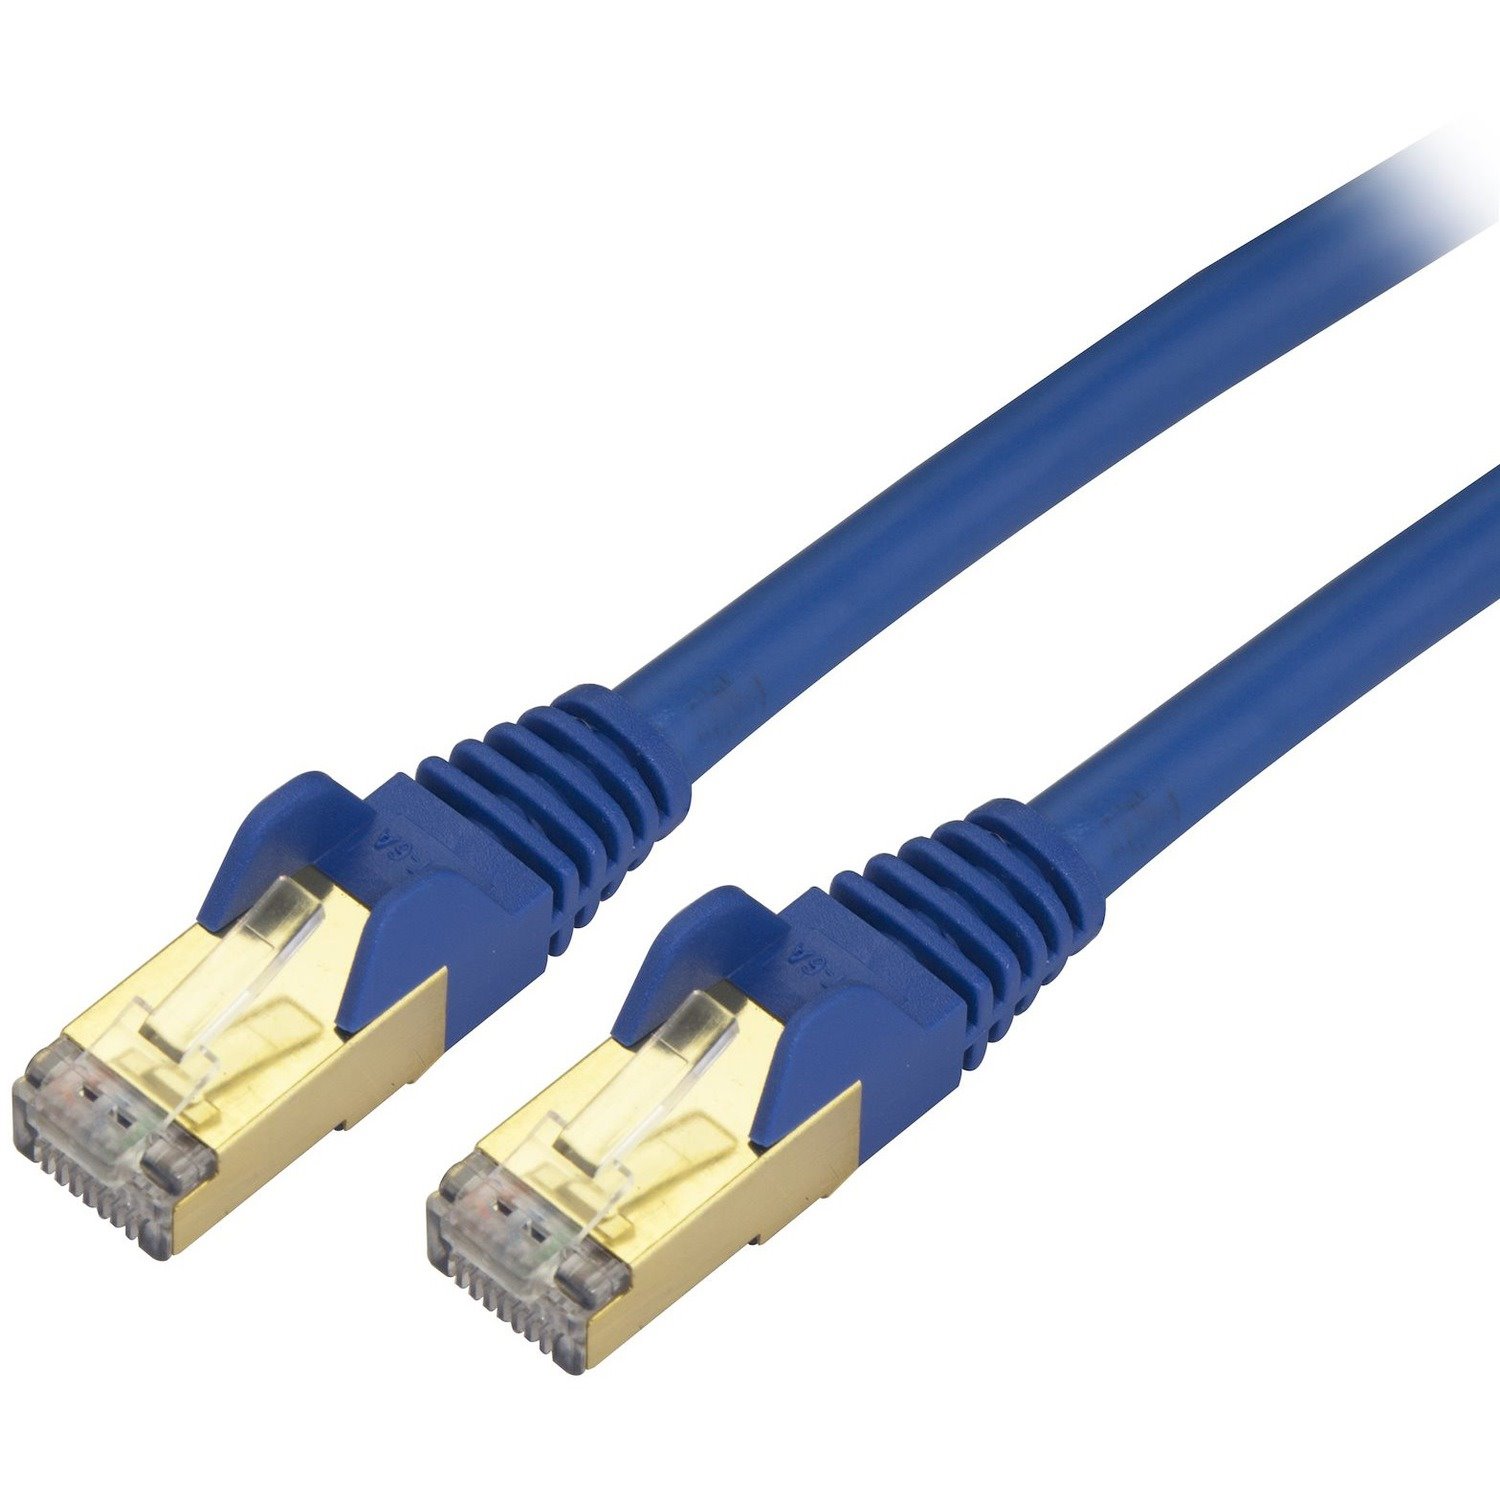 StarTech.com 8ft CAT6a Ethernet Cable - 10 Gigabit Category 6a Shielded Snagless 100W PoE Patch Cord - 10GbE Blue UL Certified Wiring/TIA